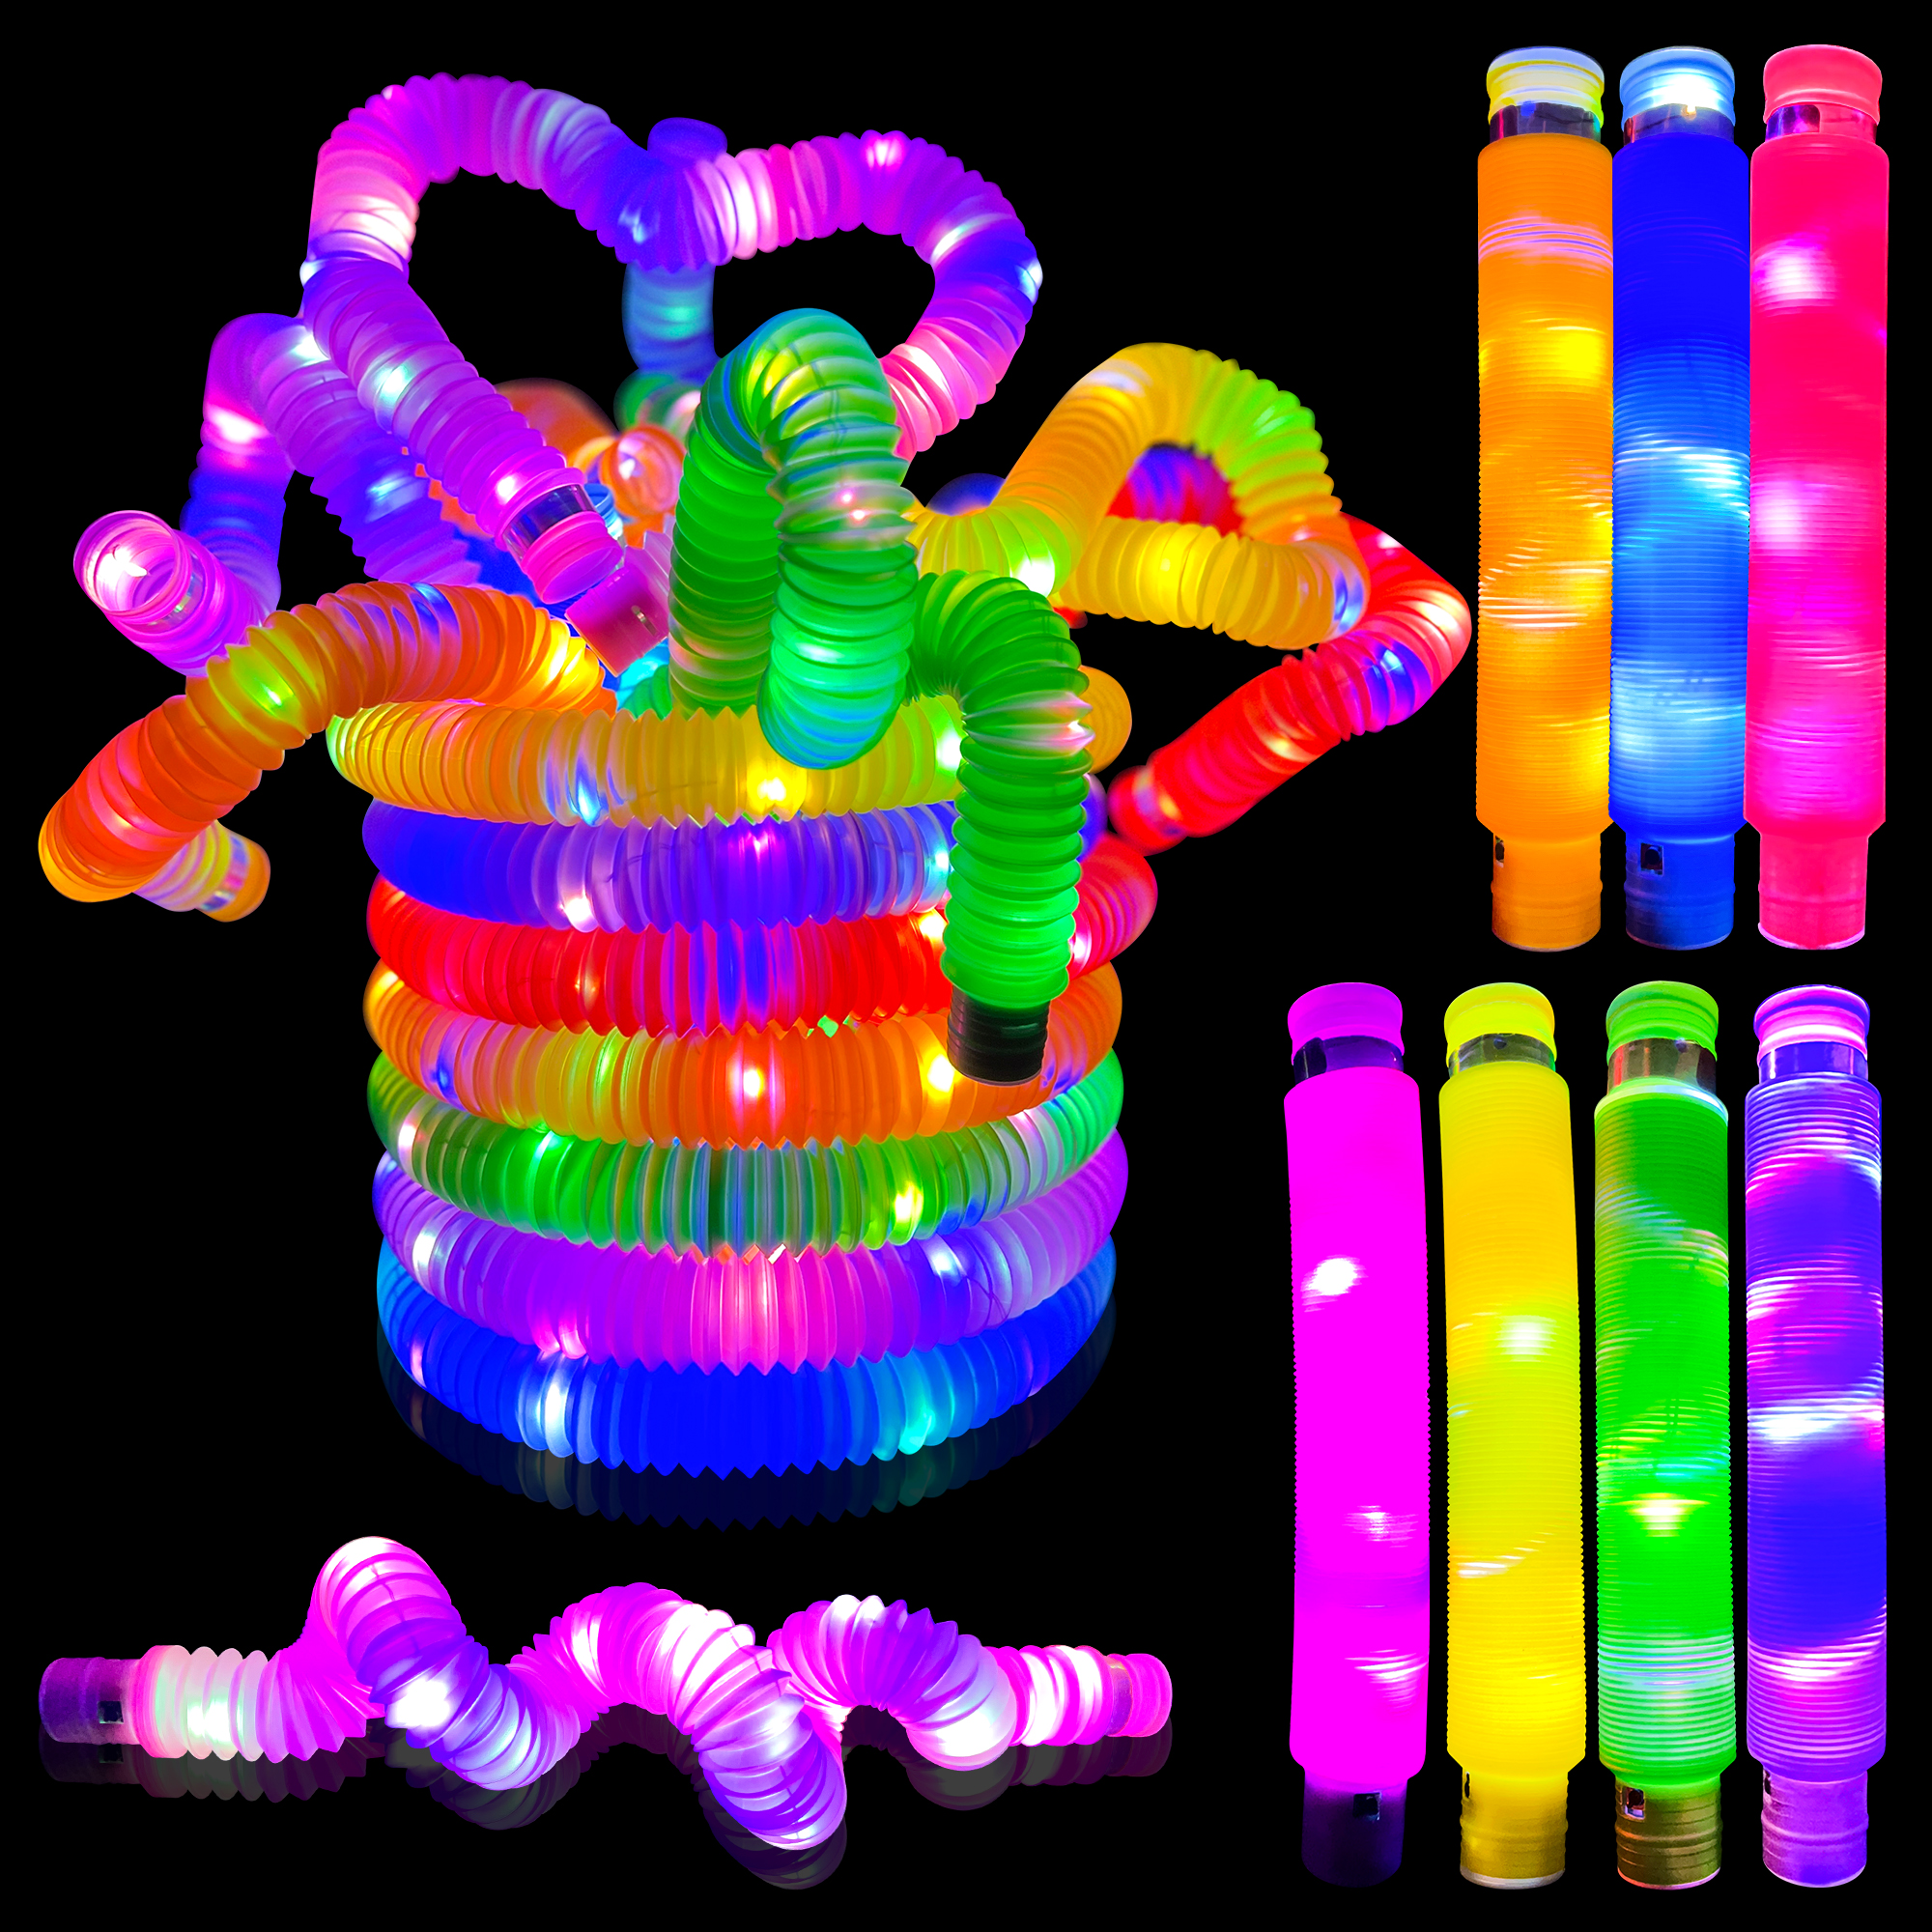 21 Pack LED Glow Tubes Halloween Party Favors Pop It Sticks Sensory Fidget Toy Light Up In The Dark Connectors for Bracelets, Pull And Stretch Toys Dance Disco Wedding Birthday Raves Concert Camping - image 3 of 7